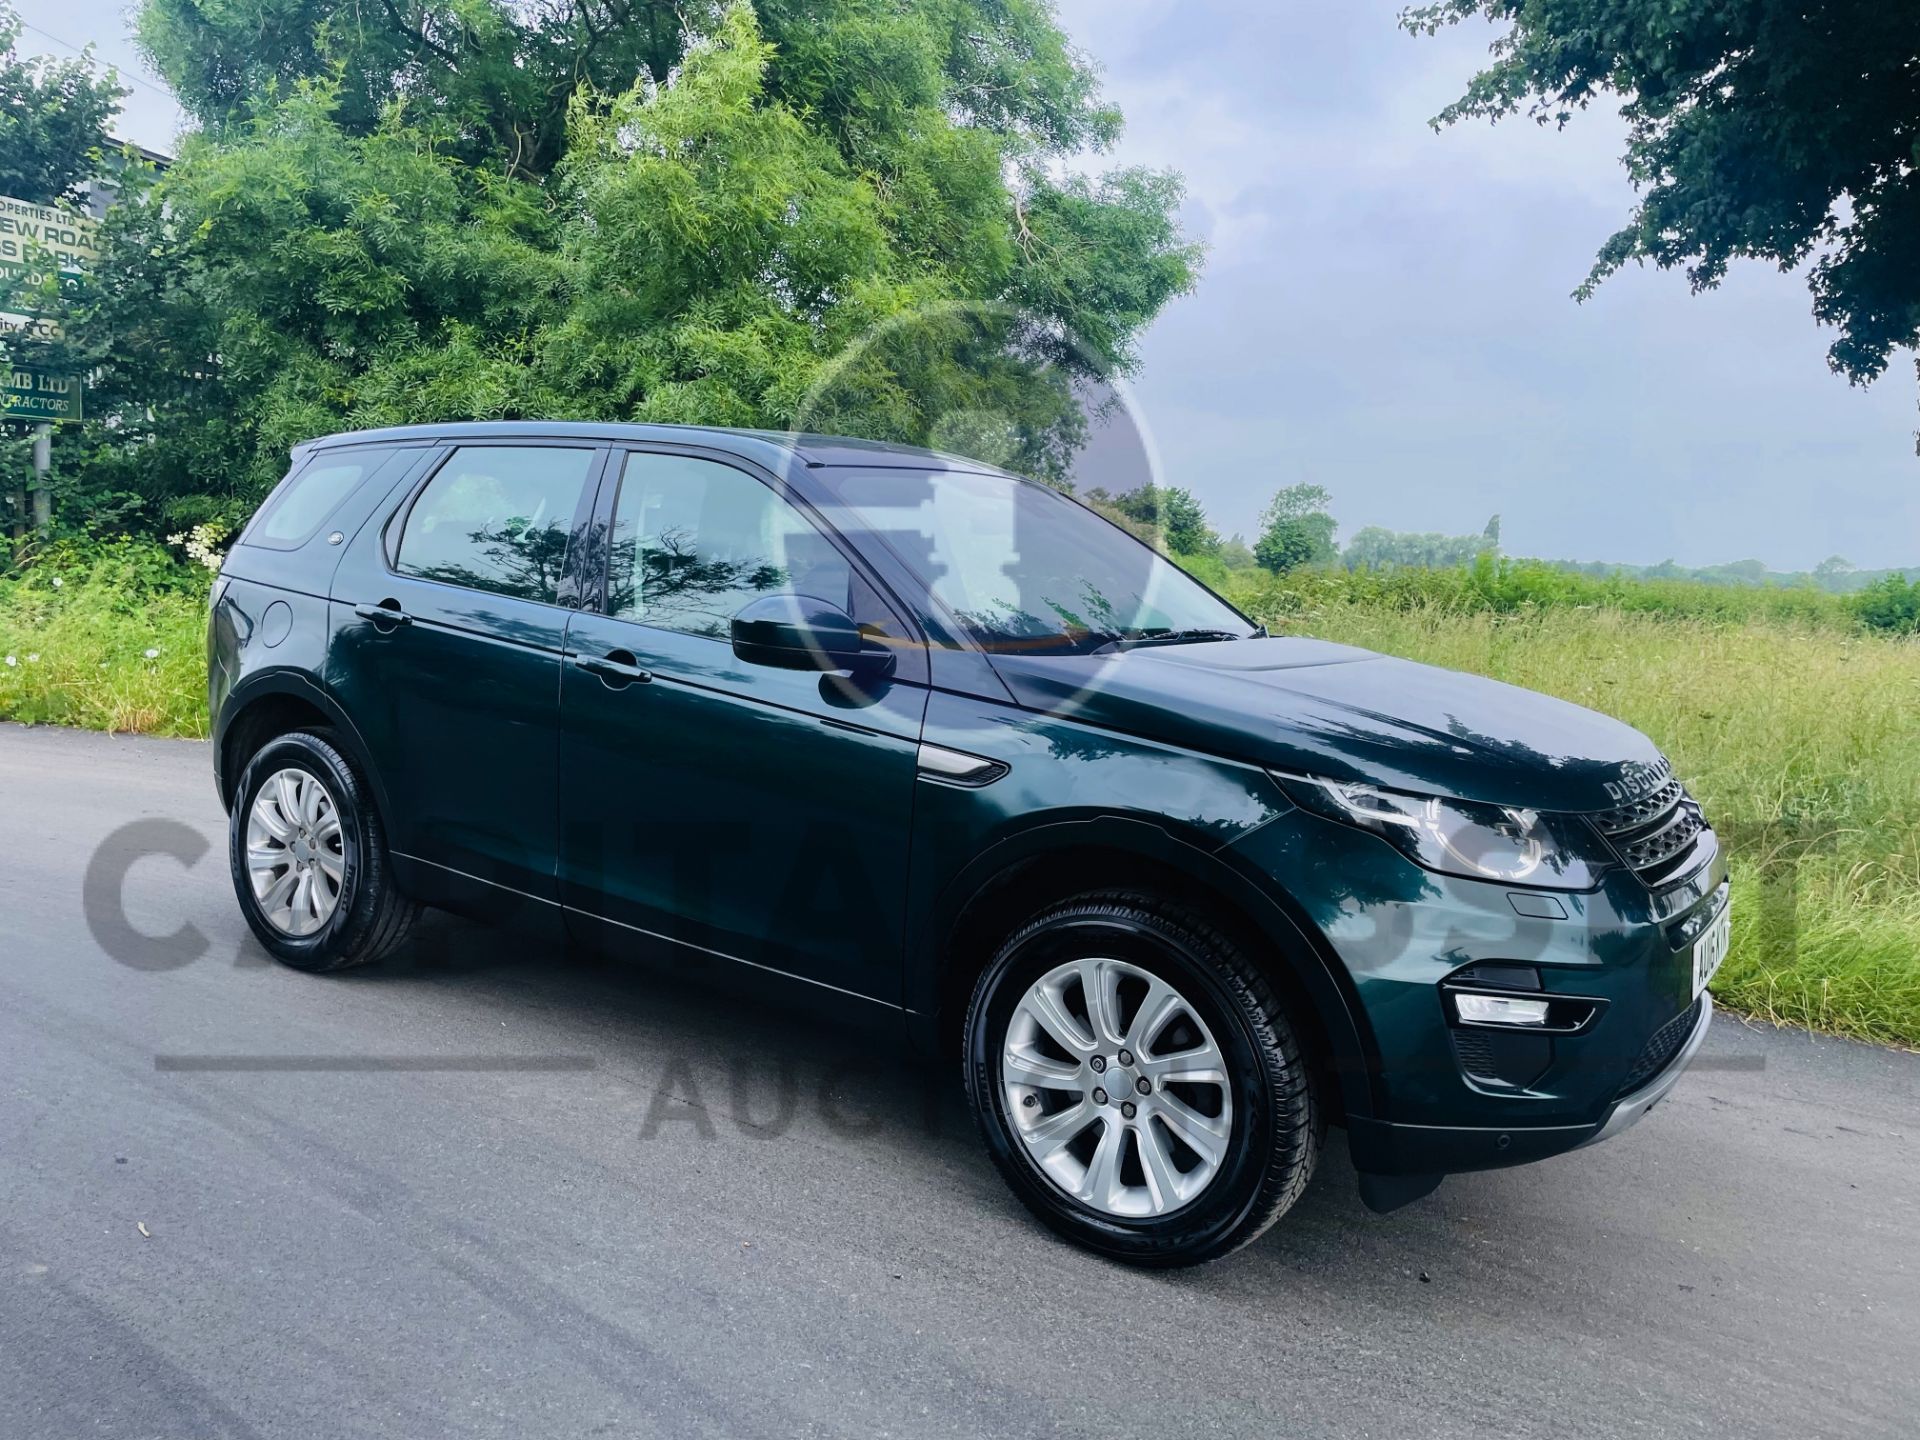 LAND ROVER DISCOVERY SPORT *SE TECH* 7 SEATER SUV (2016) 2.0 TD4 - AUTO *LEATHER & NAV* (NO VAT) - Image 2 of 54